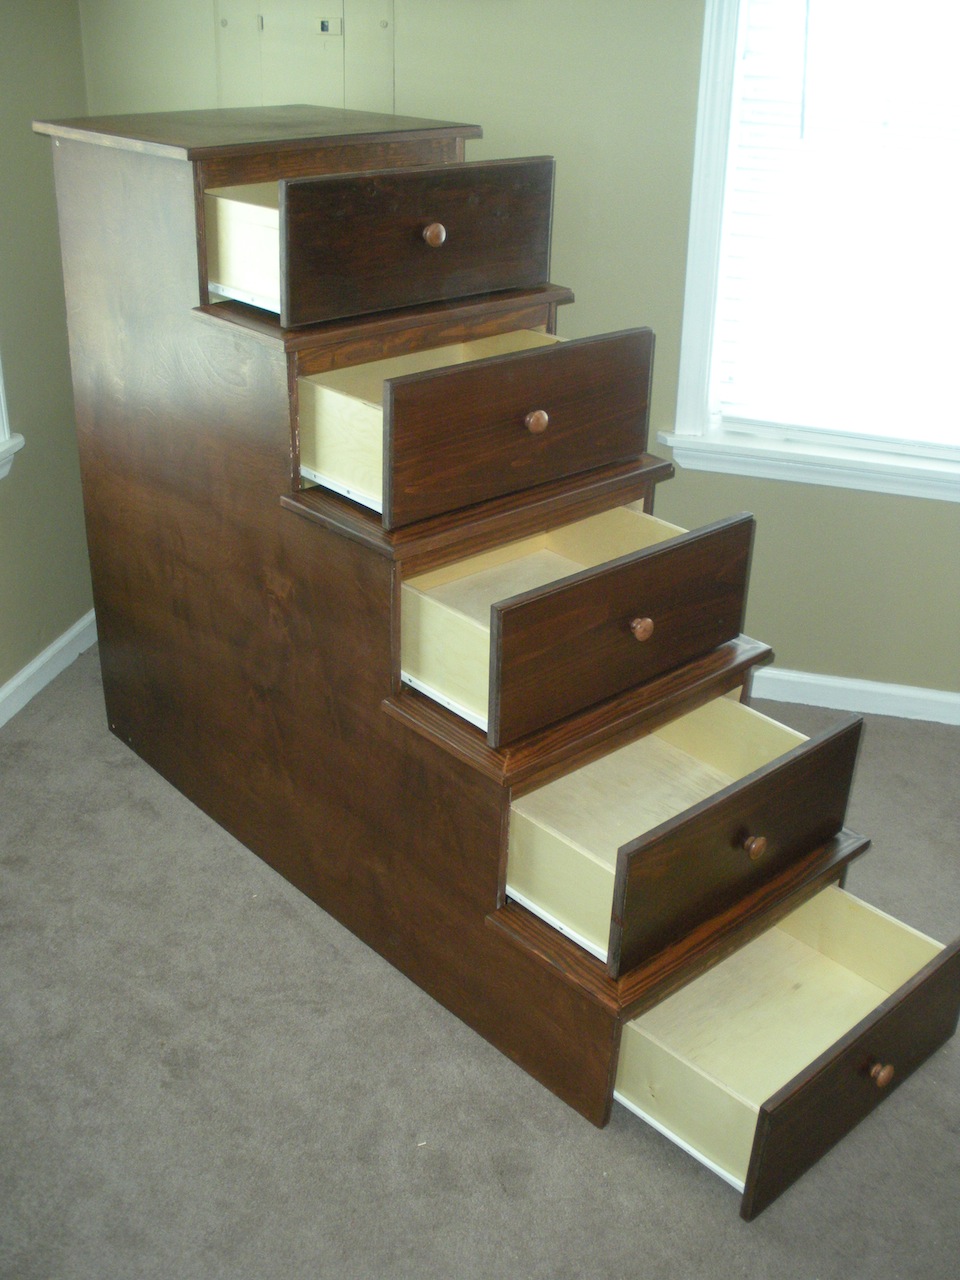 Richard S Bunk Bed Storage The Wood, How To Build Bunk Bed Stairs With Storage